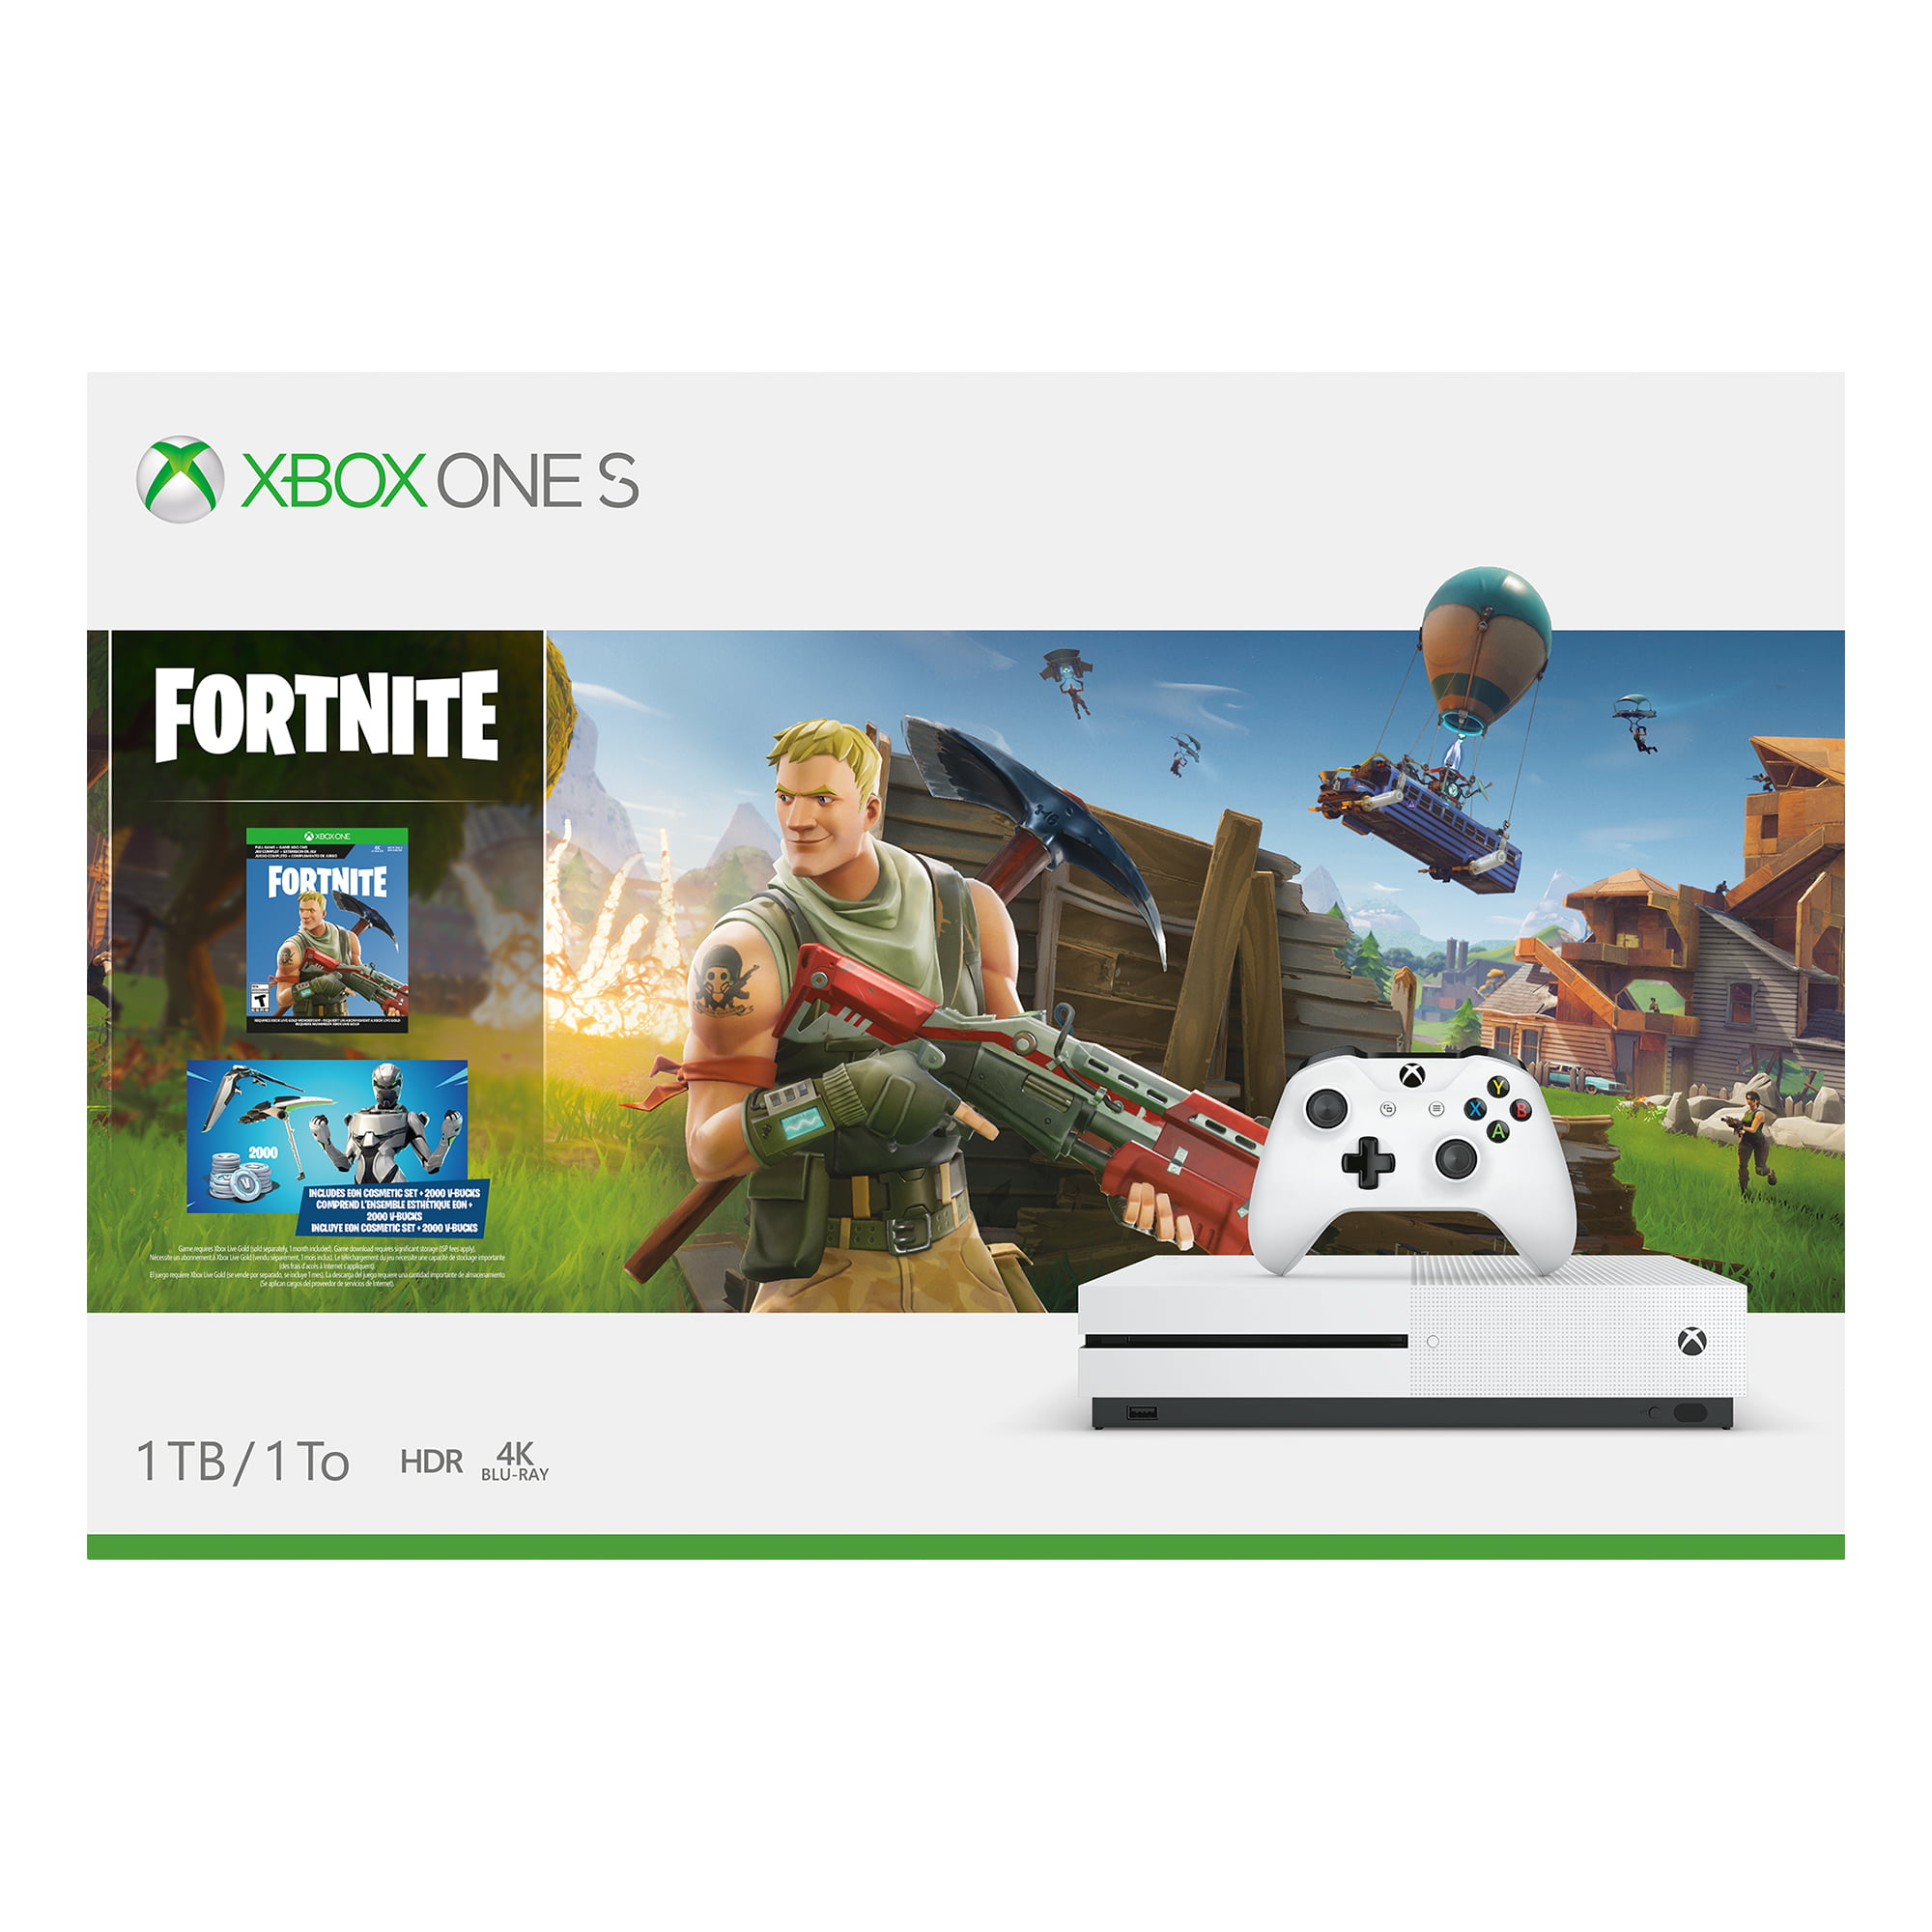 Do You Need Xbox Live Gold To Play Fortnite? (Xbox One, Xbox Series X & S)